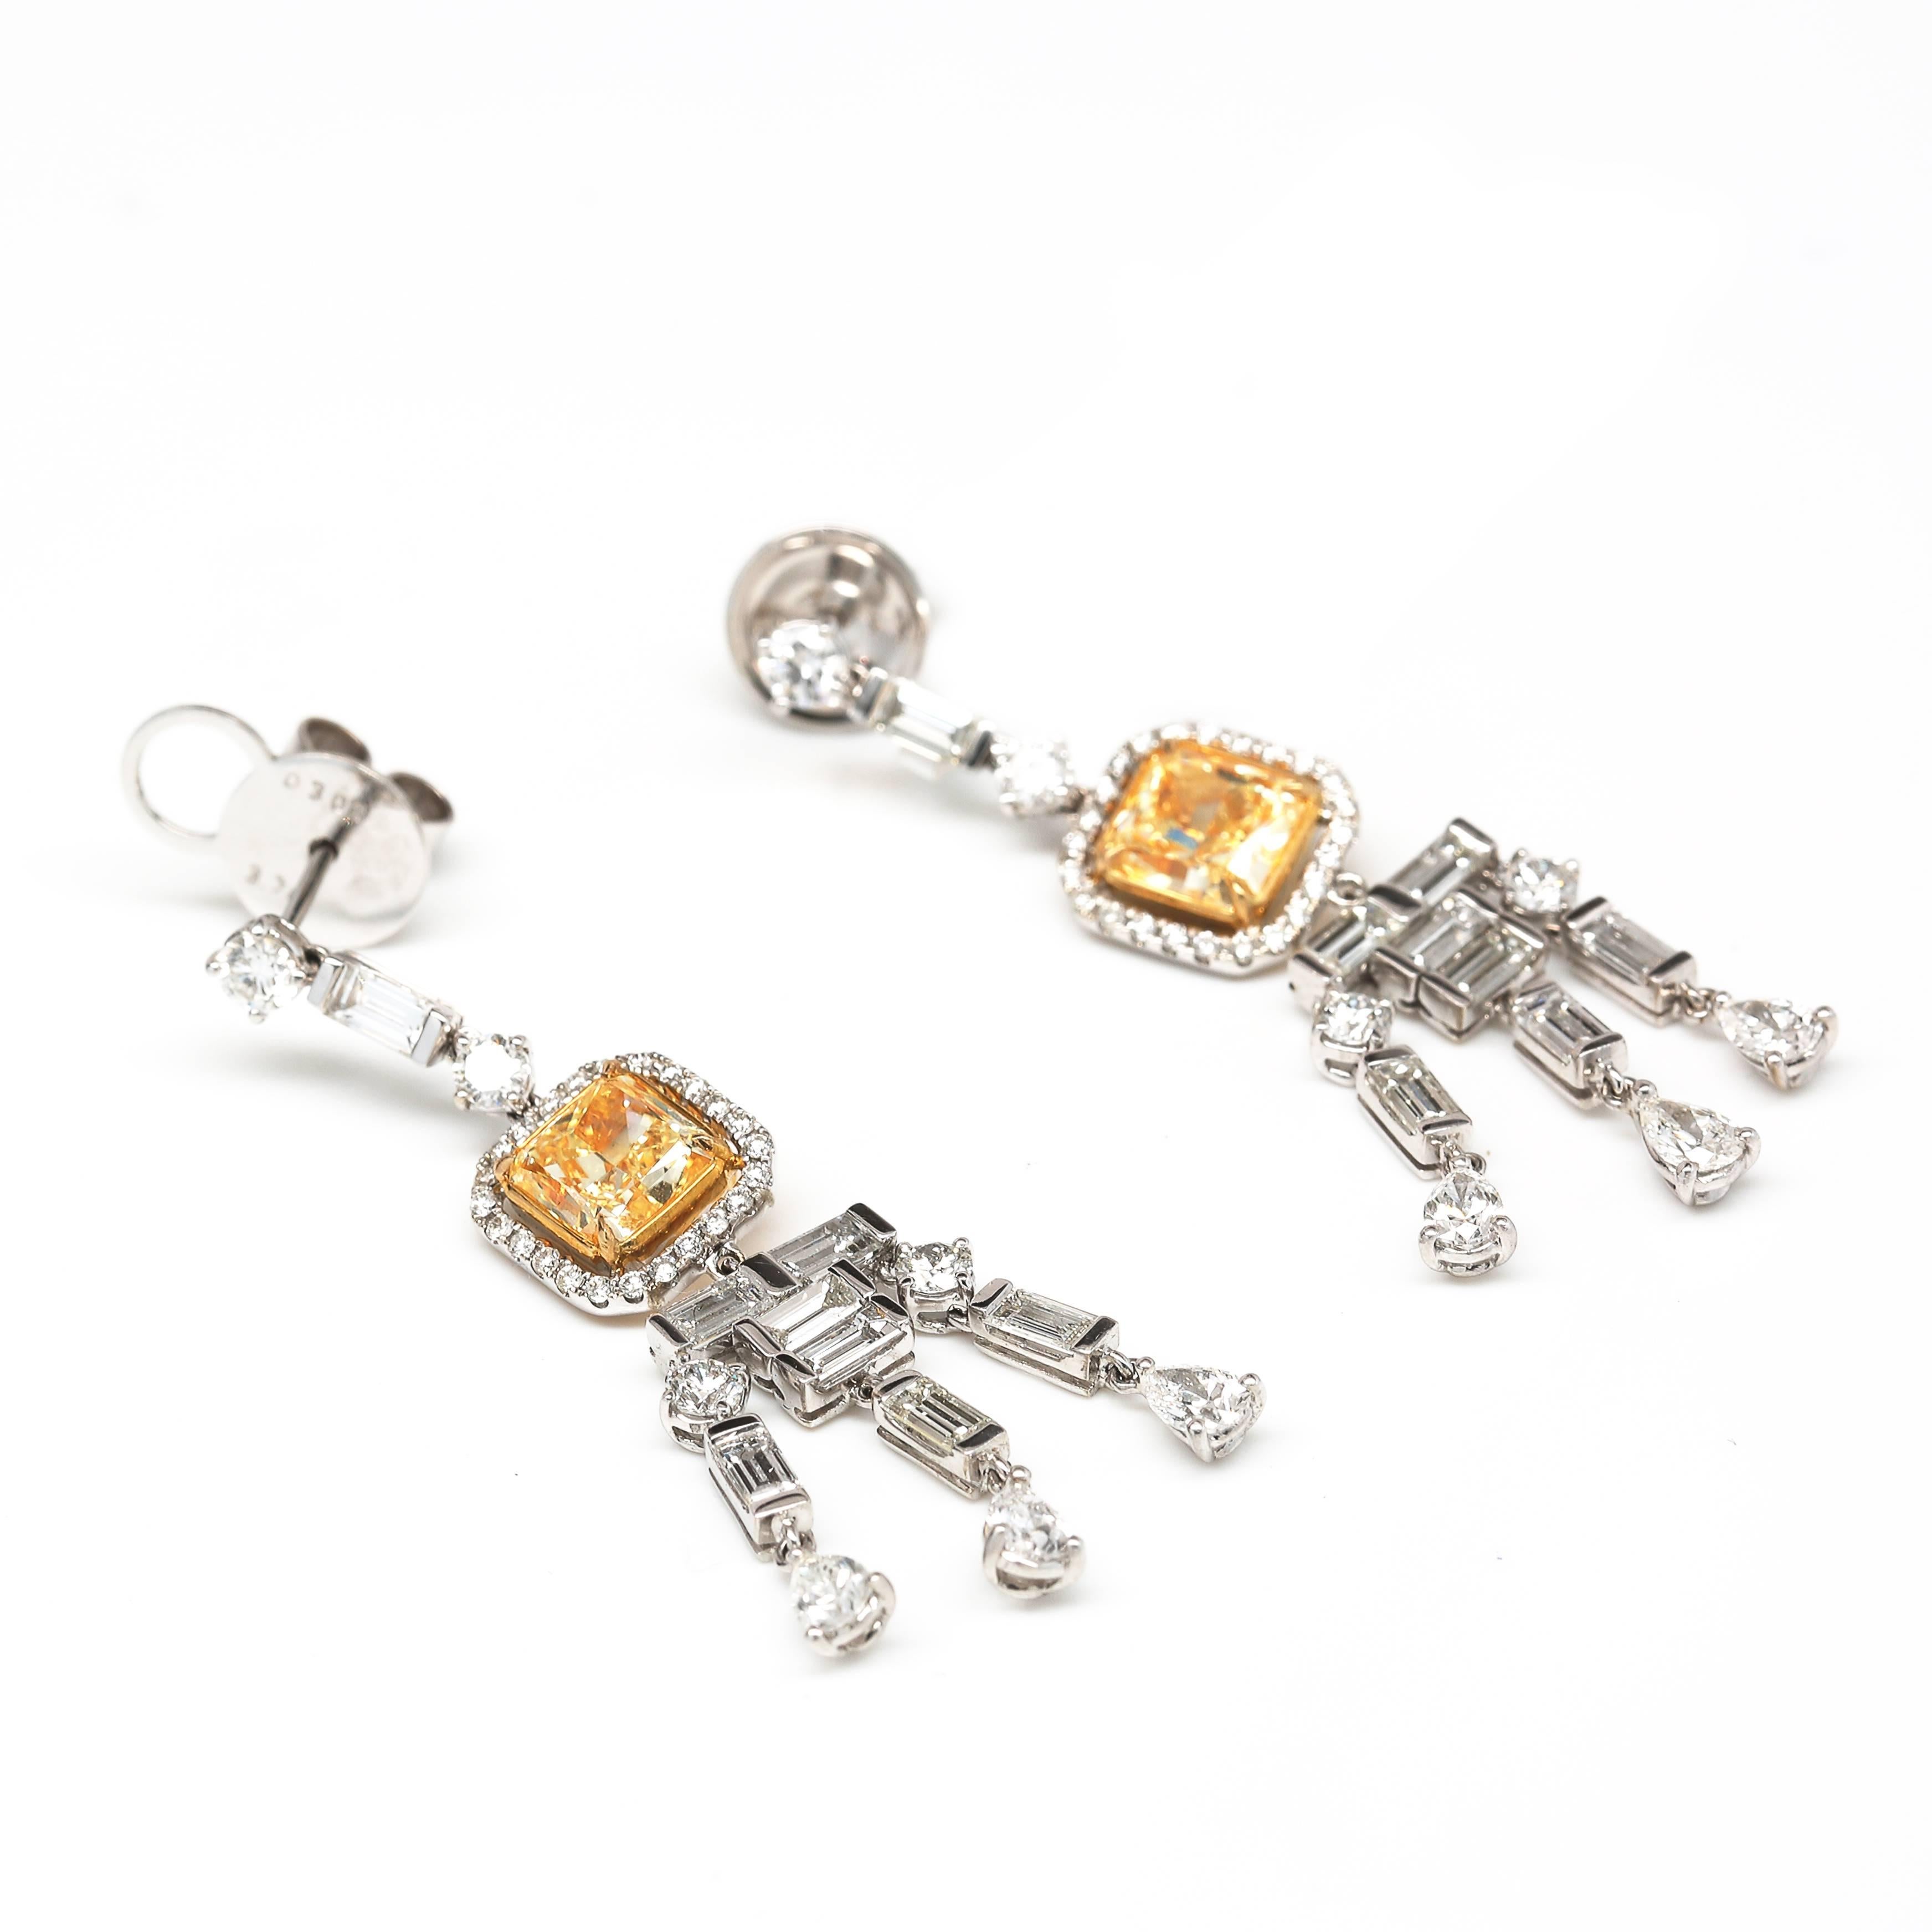 Magnificent Radiant Cut Diamonds weighing 1.59 & 1.58 Carat Fancy Yellow /VVS
These Earrings have 1.93 Carats of Baguettes, .96 Carats of Pear Shapes and 94 Carats in Round Diamonds for a total of 3.83 Carats in D-E VVS Diamonds,  
Total diamond